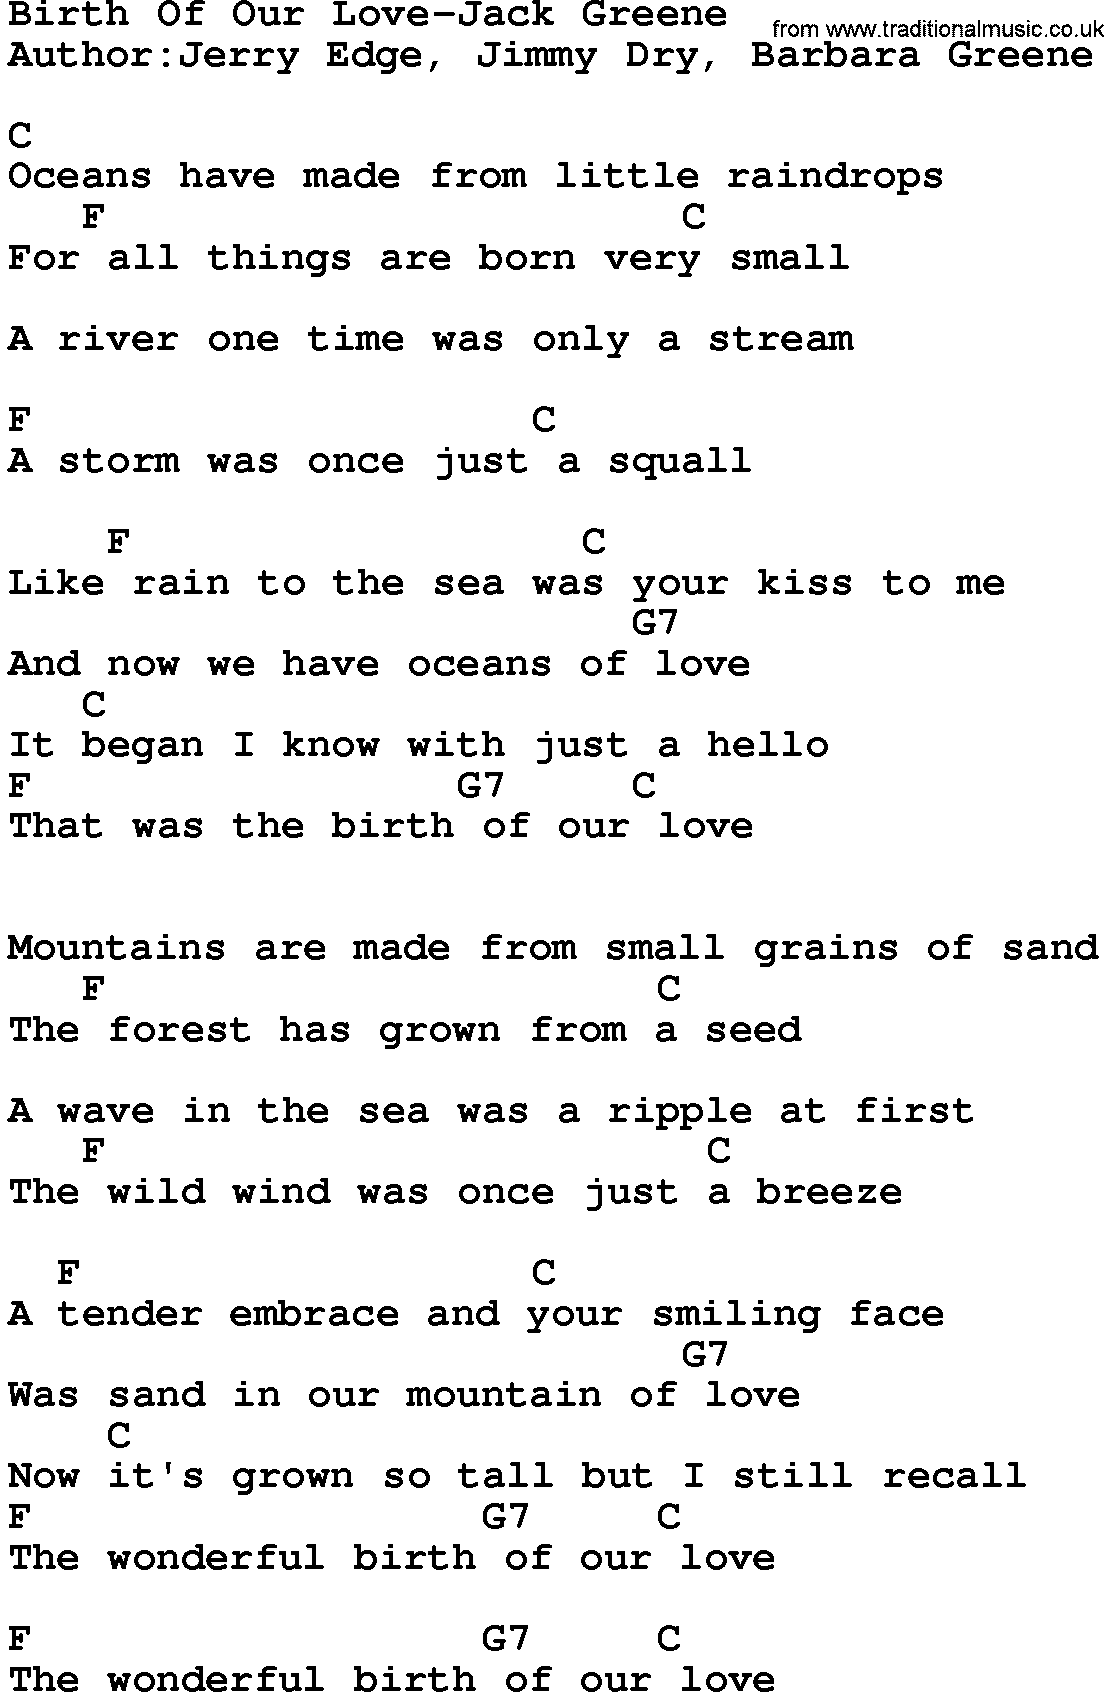 Country music song: Birth Of Our Love-Jack Greene lyrics and chords